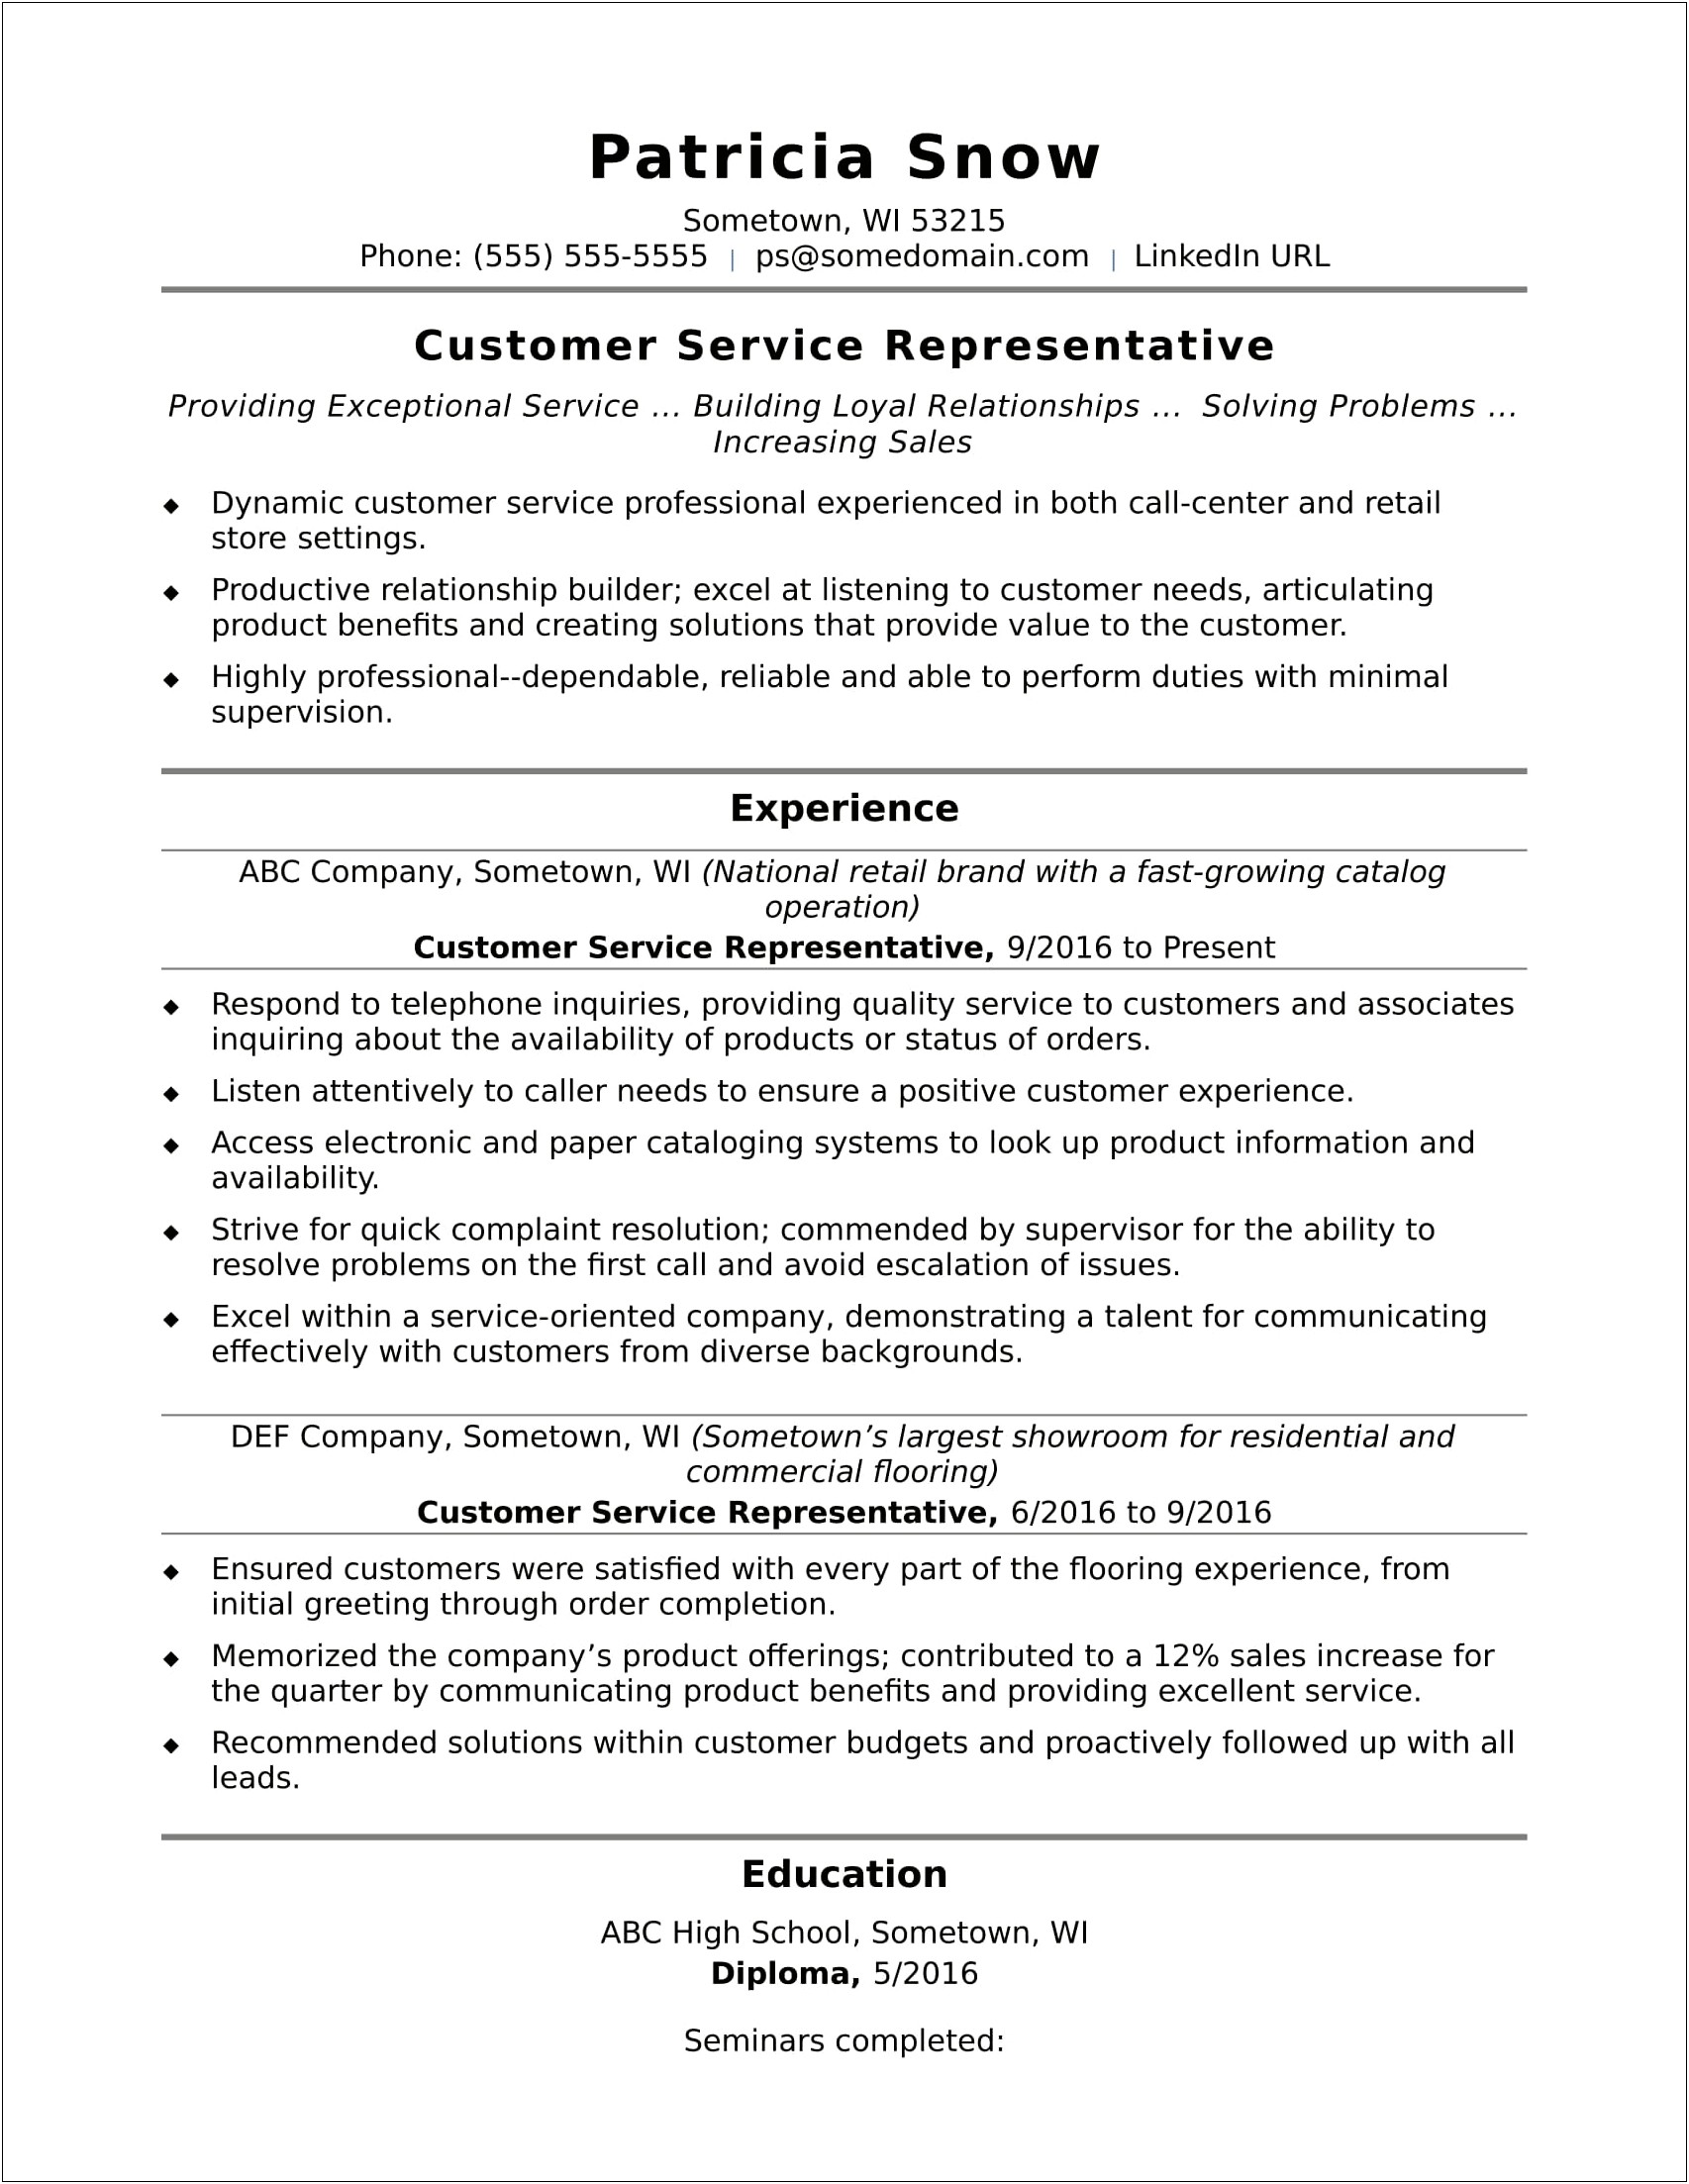 Resume Examples 2019 Customer Service